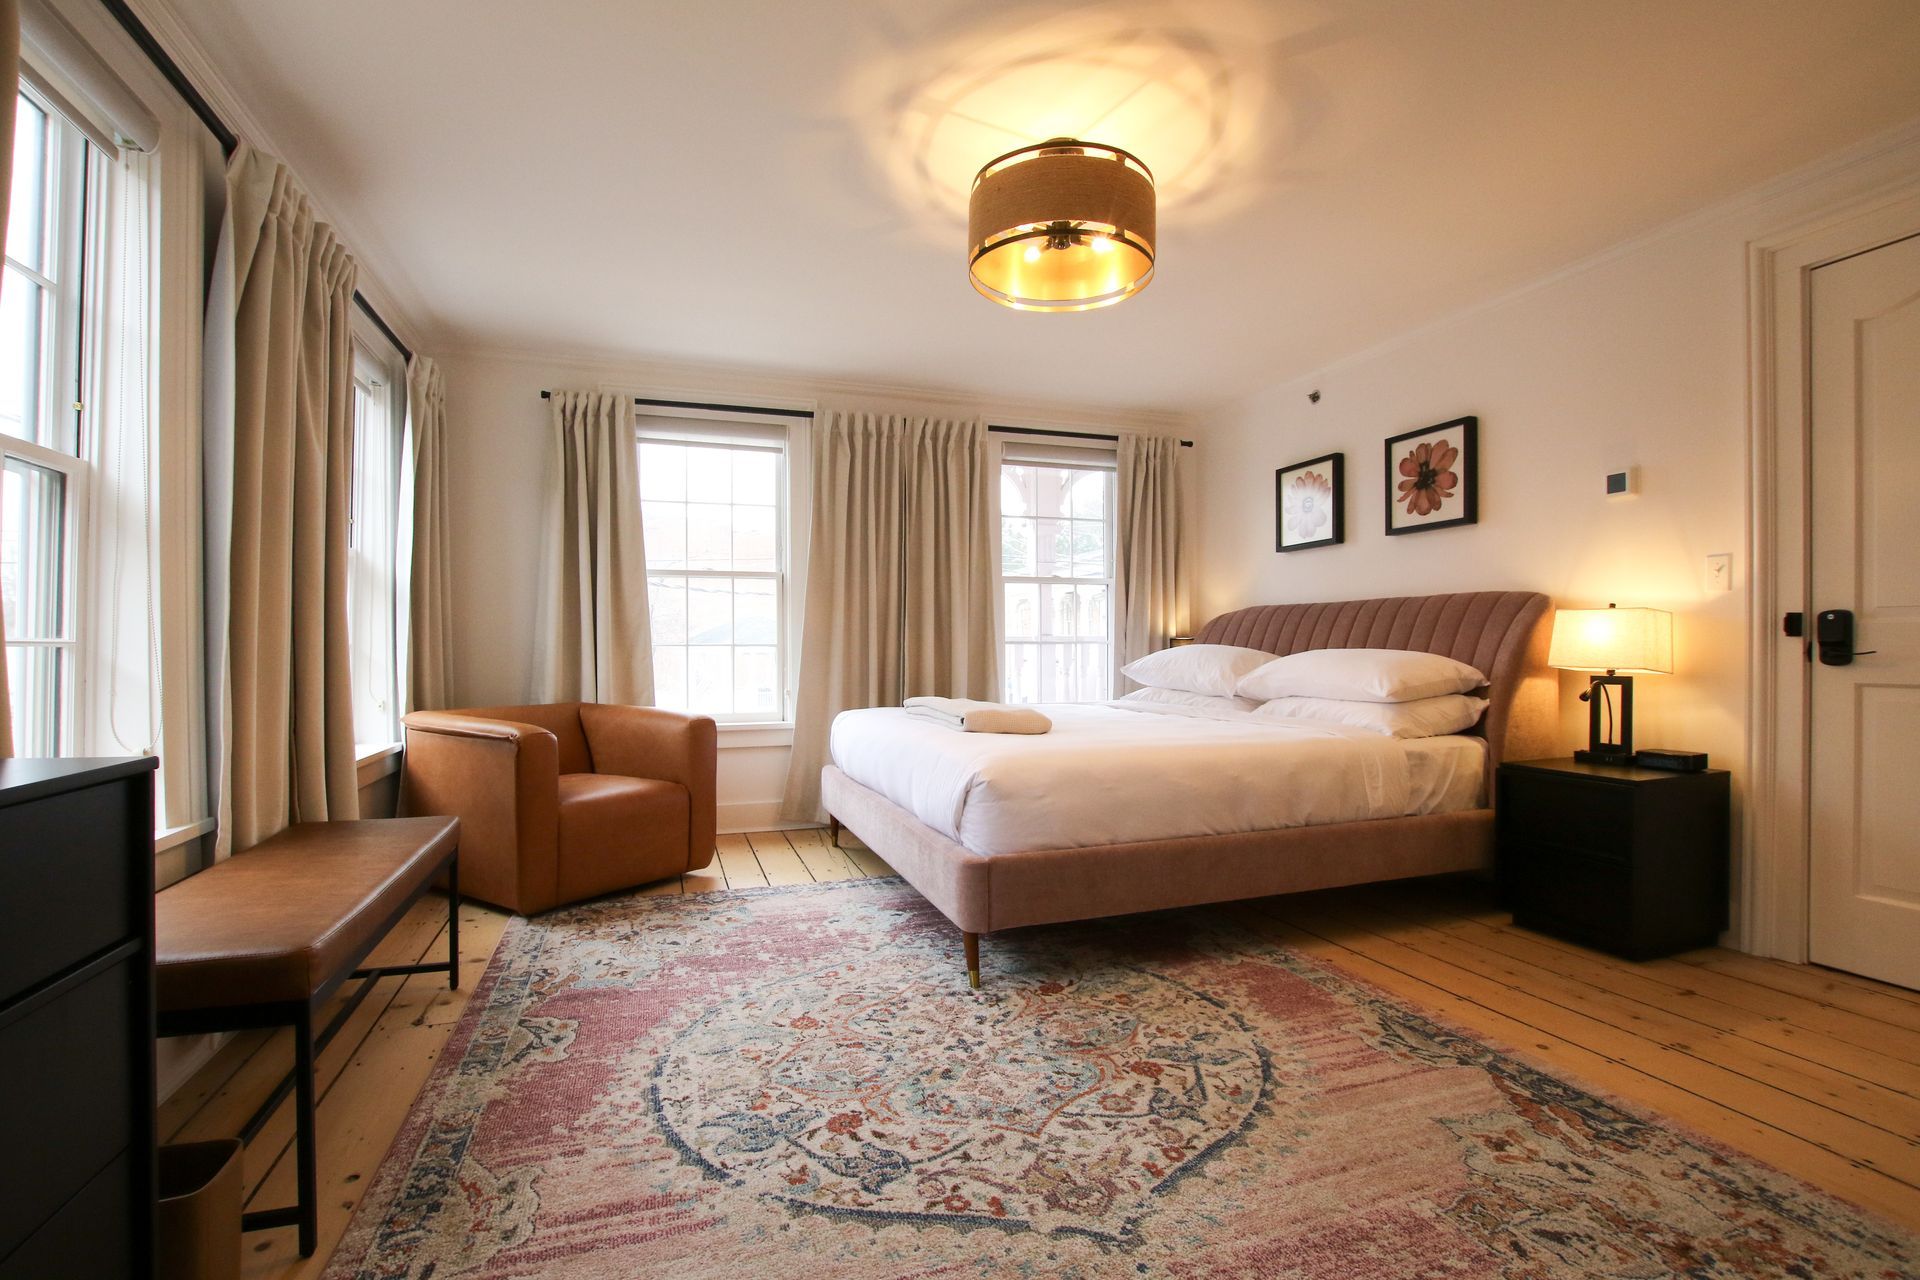 A large room with king size bed and four windows draped by white velvet curtains. Pink upholstery adorns the bed and carpet. A pendant light hangs over the bed.